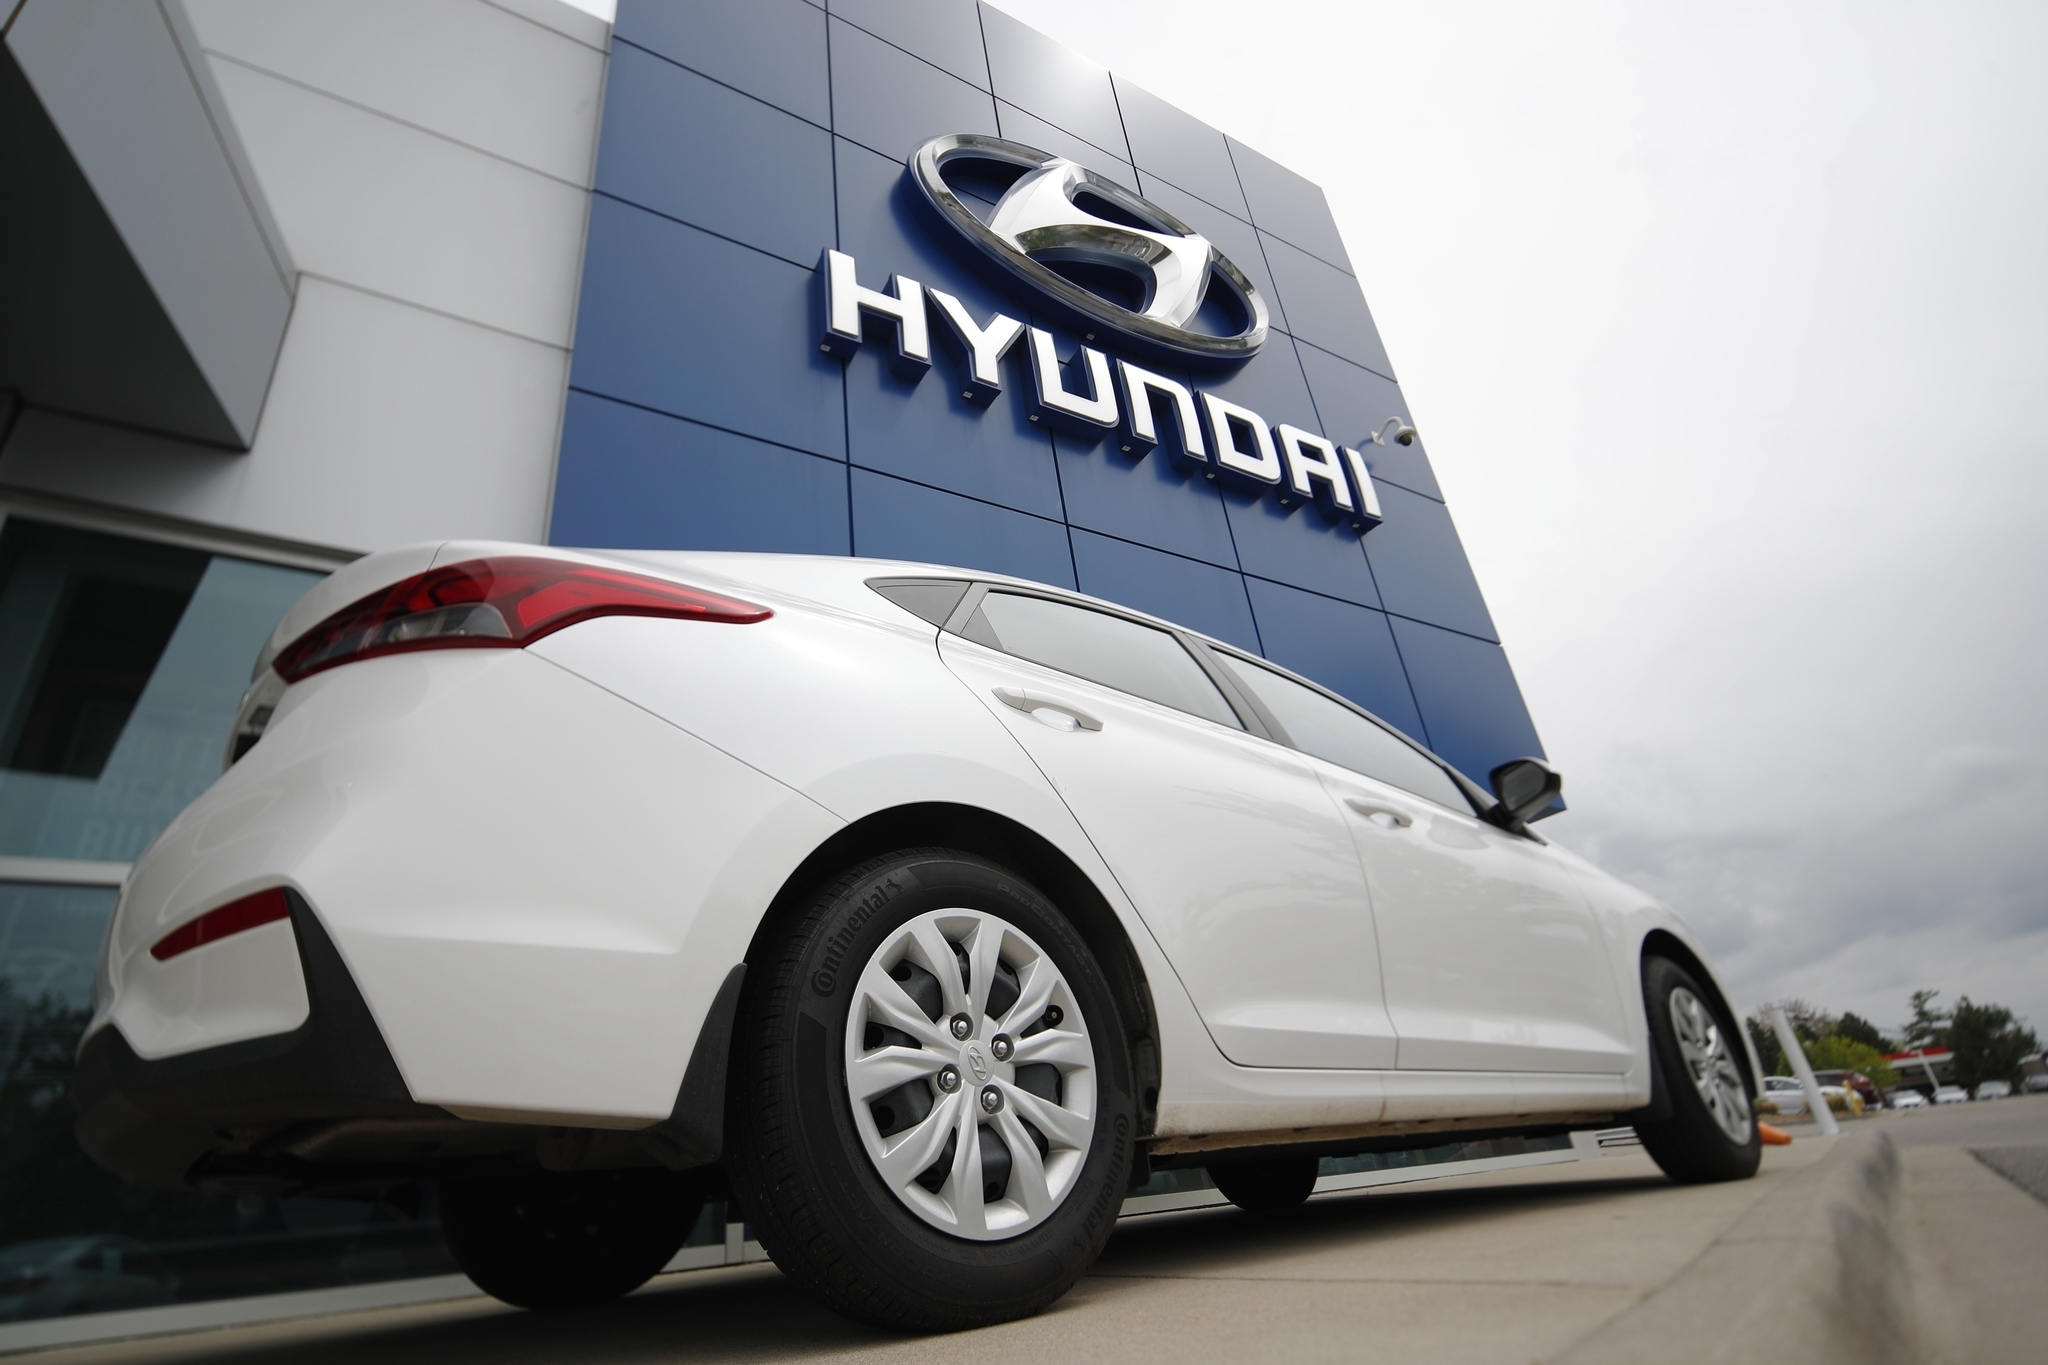 FILE - An unsold 2019 Accent sedan sits at a  lt;HIT gt;Hyundai lt;/HIT gt; dealership in Littleton, Colo. on Sunday, May 19, 2019. Korean automaker  lt;HIT gt;Hyundai lt;/HIT gt; is recalling 239,000 cars because the seat belts can explode and injure vehicle occupants. The recall, which expands and replaces three previous recalls, includes 2019-2022 Accents, 2021-2023 Elantras and 2021-2022 Elantra HEVs, or hybrid electric vehicles. Owners will be able to take their recalled vehicles to dealerships where the seat belt pretensioners will be fit with a cap at no cost. (AP Photo/David Zalubowski, File)